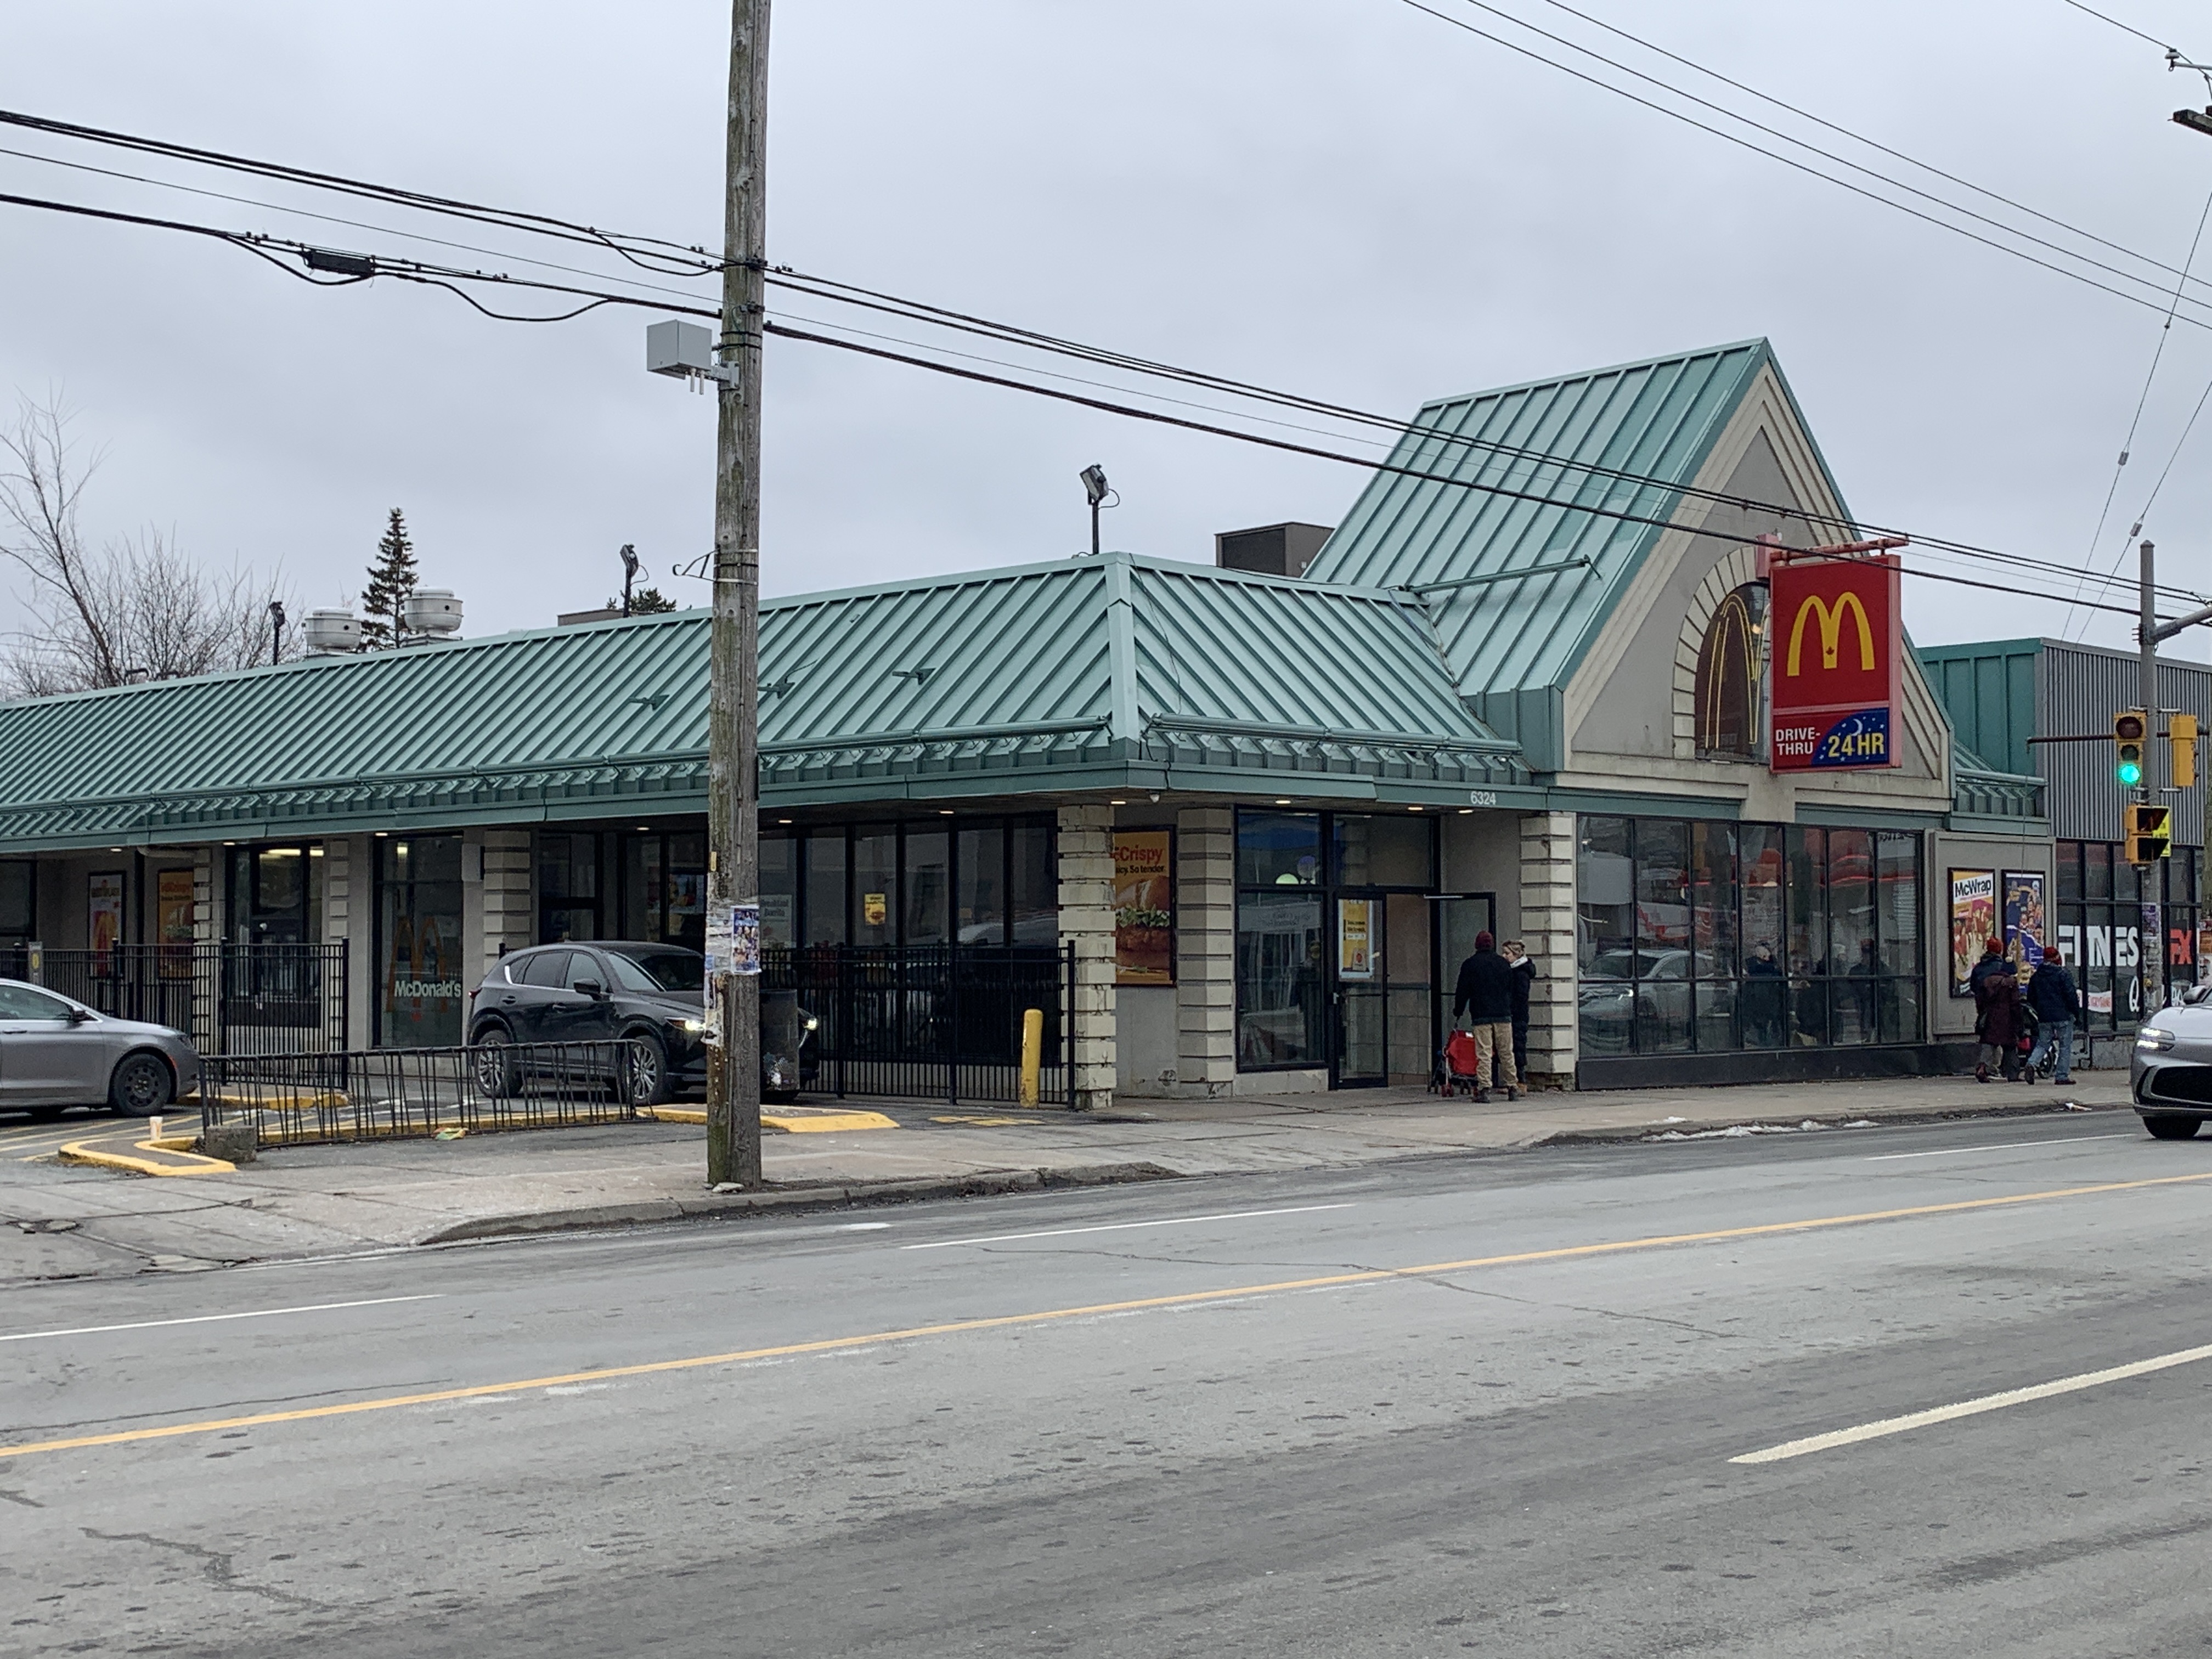 ‘End of an era’: Halifax residents reminisce as iconic Quinpool McDonald’s closes